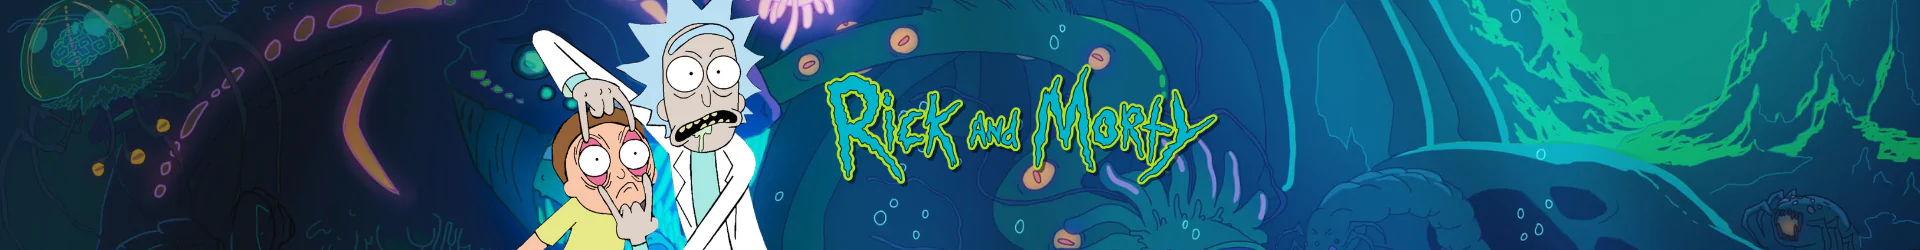 Rick and Morty pencil cases banner